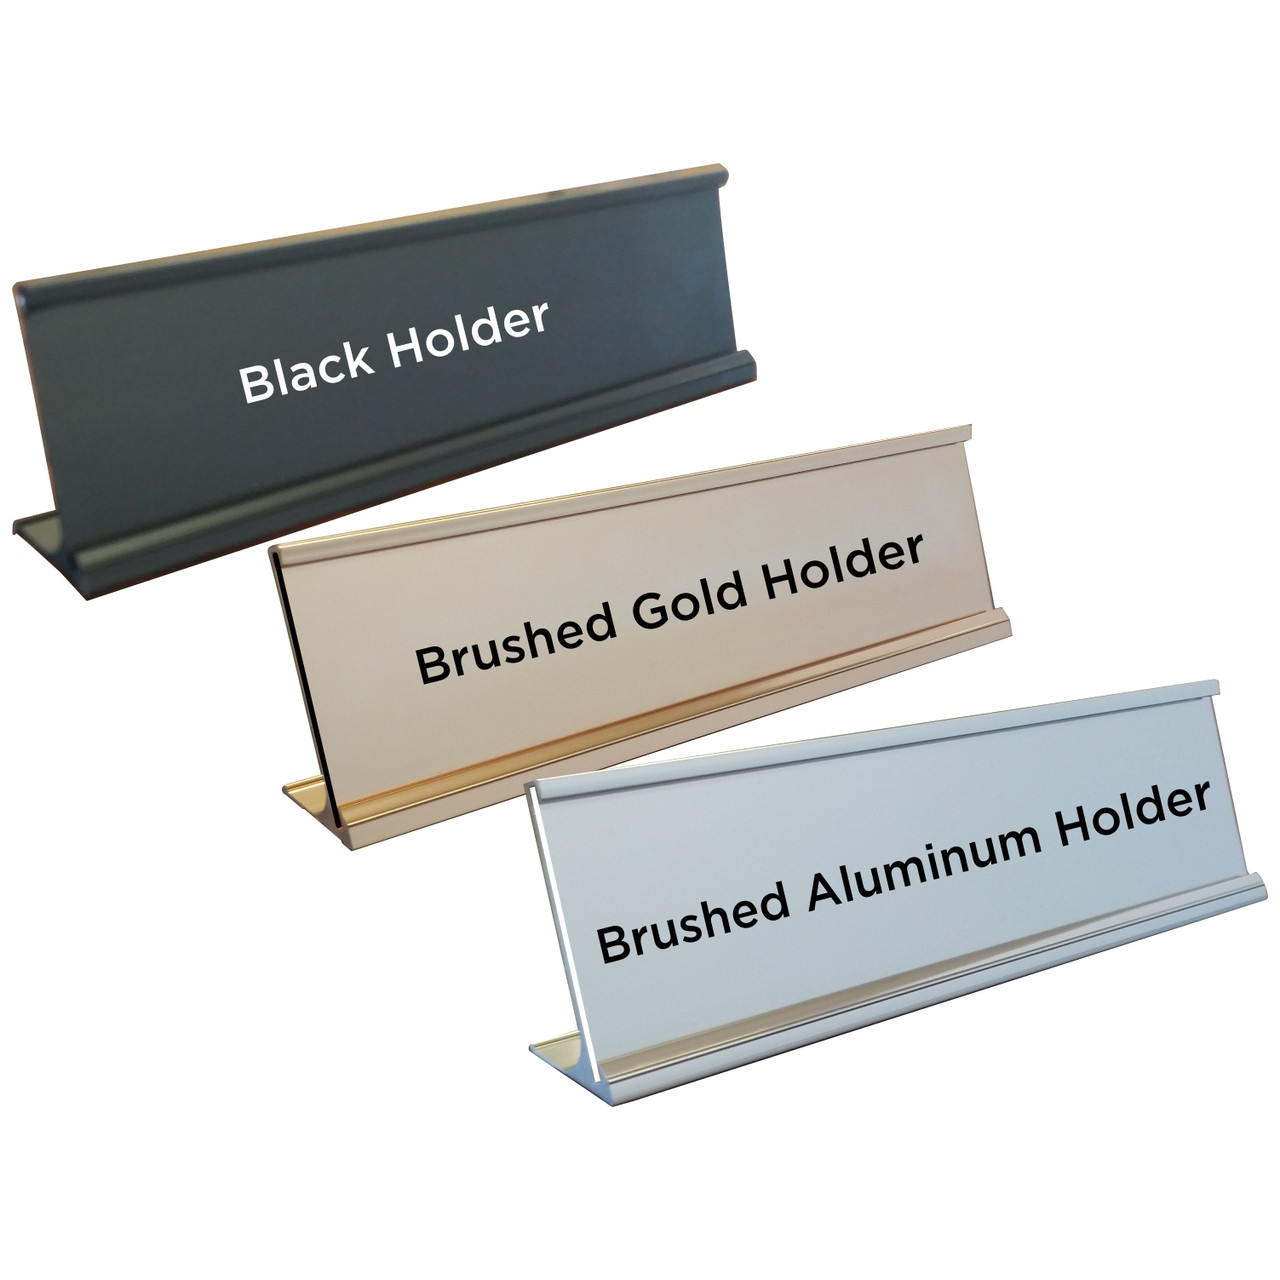 Land Rover Name Plates with Optional Holder